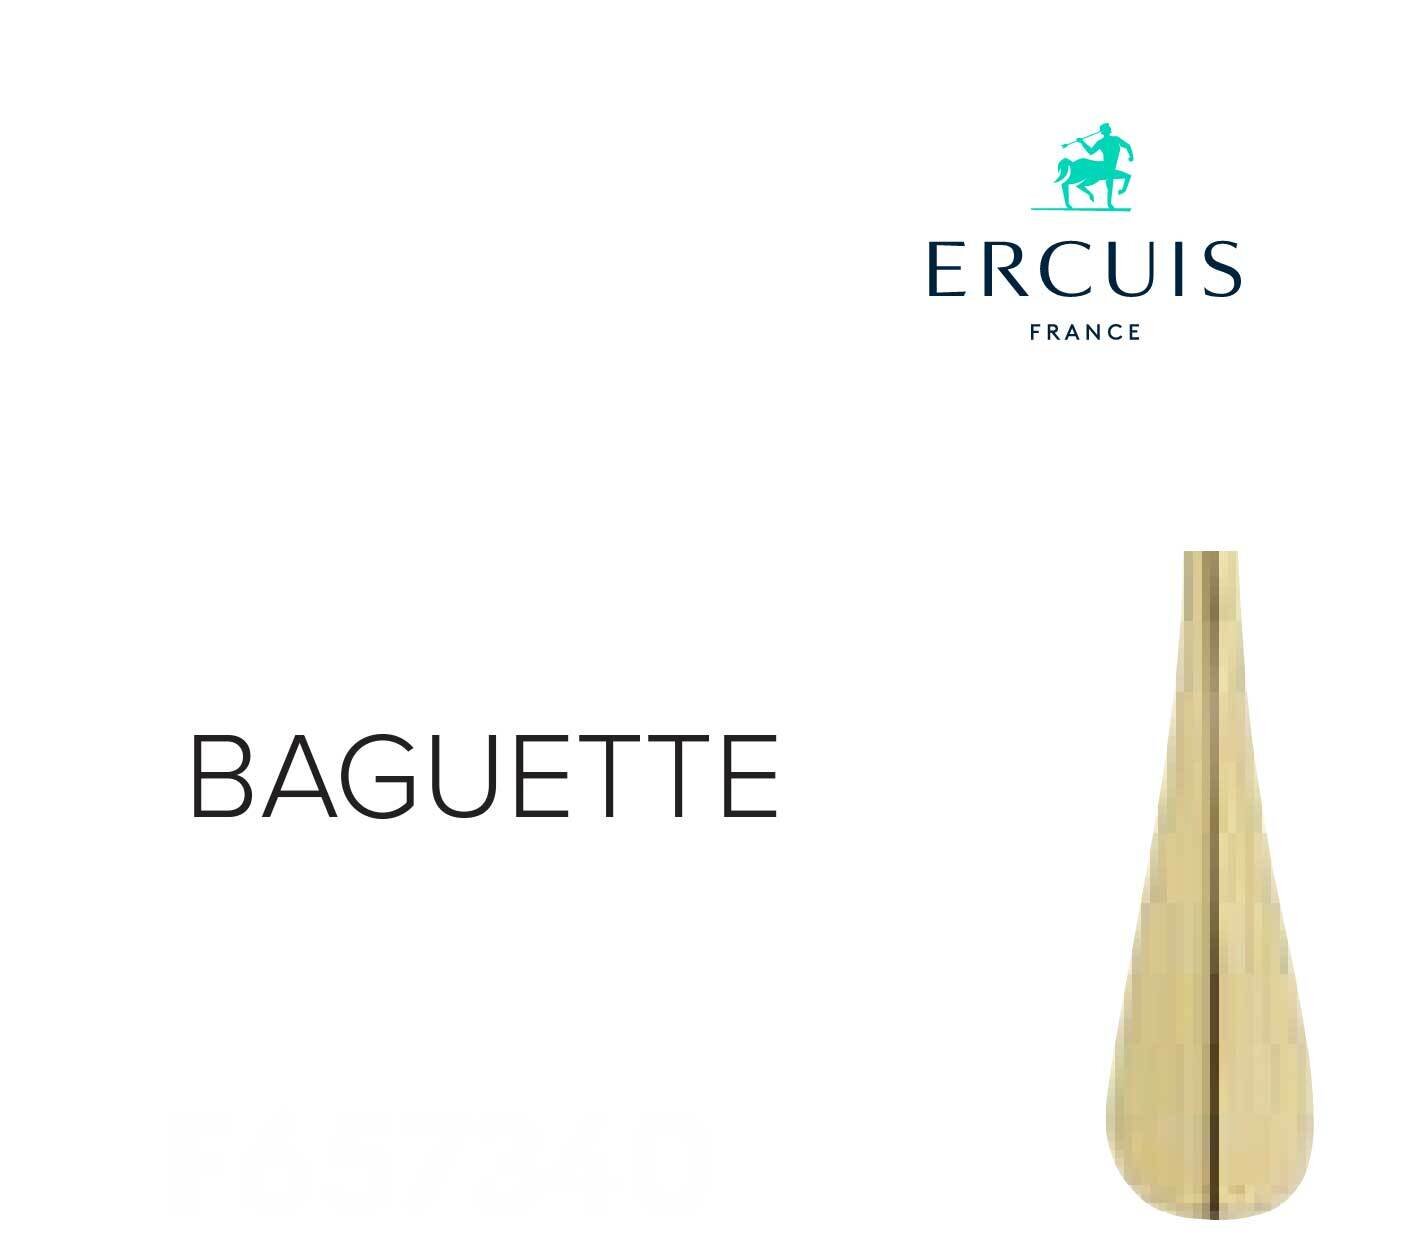 Ercuis Baguette Soda Spoon Gold Plated F657340-21